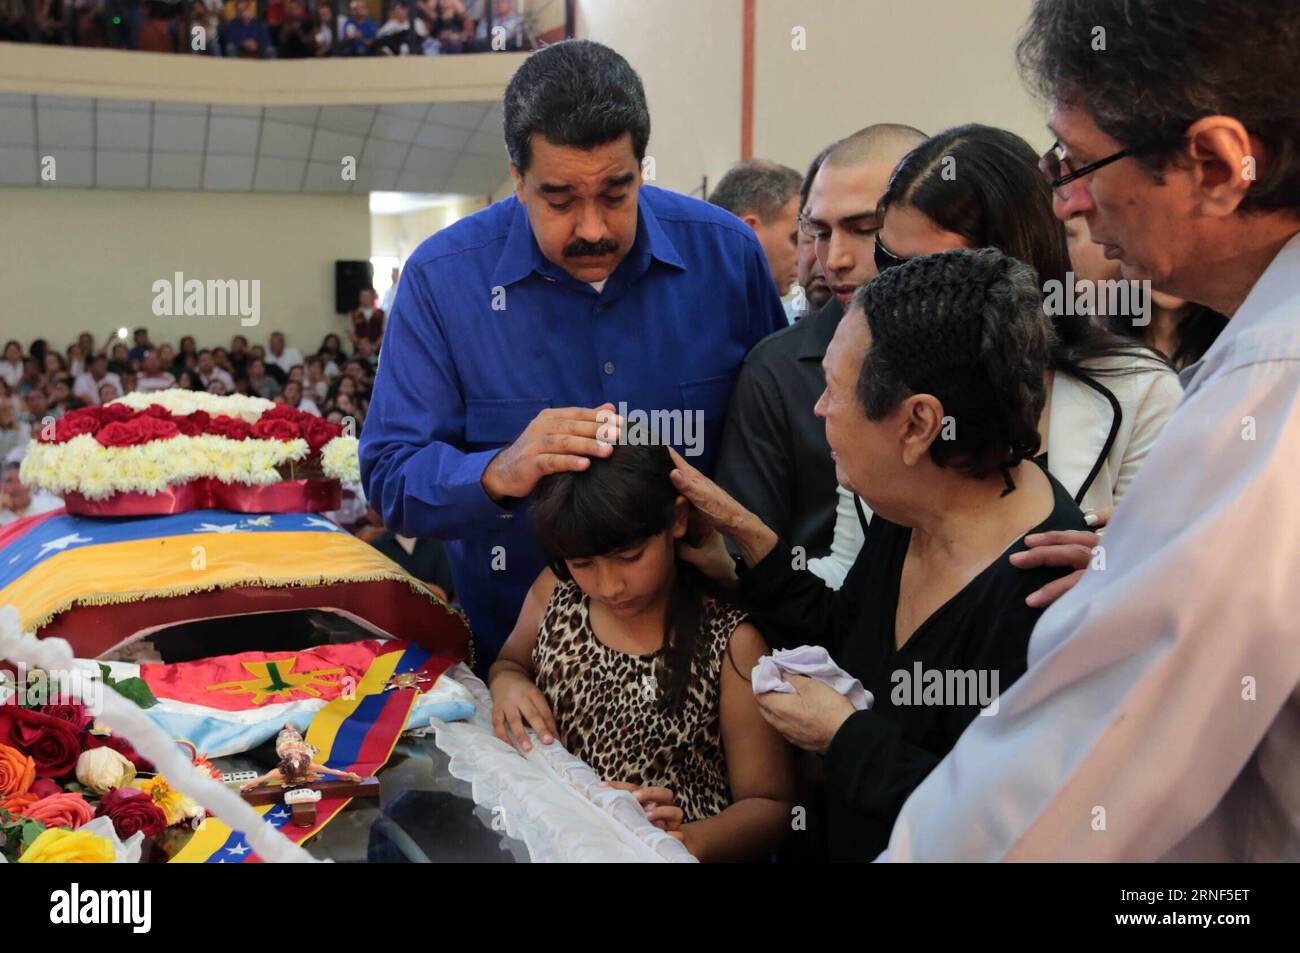 BARINAS, July 19, 2016 -- Image provided by the Venezuelan Presidency shows President Nicolas Maduro (R) interacting with a girl during the funeral of Anibal Chavez, brother of late Venezuelan President Hugo Chavez, at Casa del Alba, in Barinas, Venezuela, on July 19, 2016. ) (jp) (da) NO ARCHIVE-NO SALES EDITORIAL USE ONLY VENEZUELA-BARINAS-POLITICS-FUNERAL VENEZUELA SxPRESIDENCY PUBLICATIONxNOTxINxCHN   Barinas July 19 2016 Image provided by The Venezuelan Presidency Shows President Nicolas Maduro r interacting With a Girl during The Funeral of Anibal Chavez Brother of Late Venezuelan Presid Stock Photo